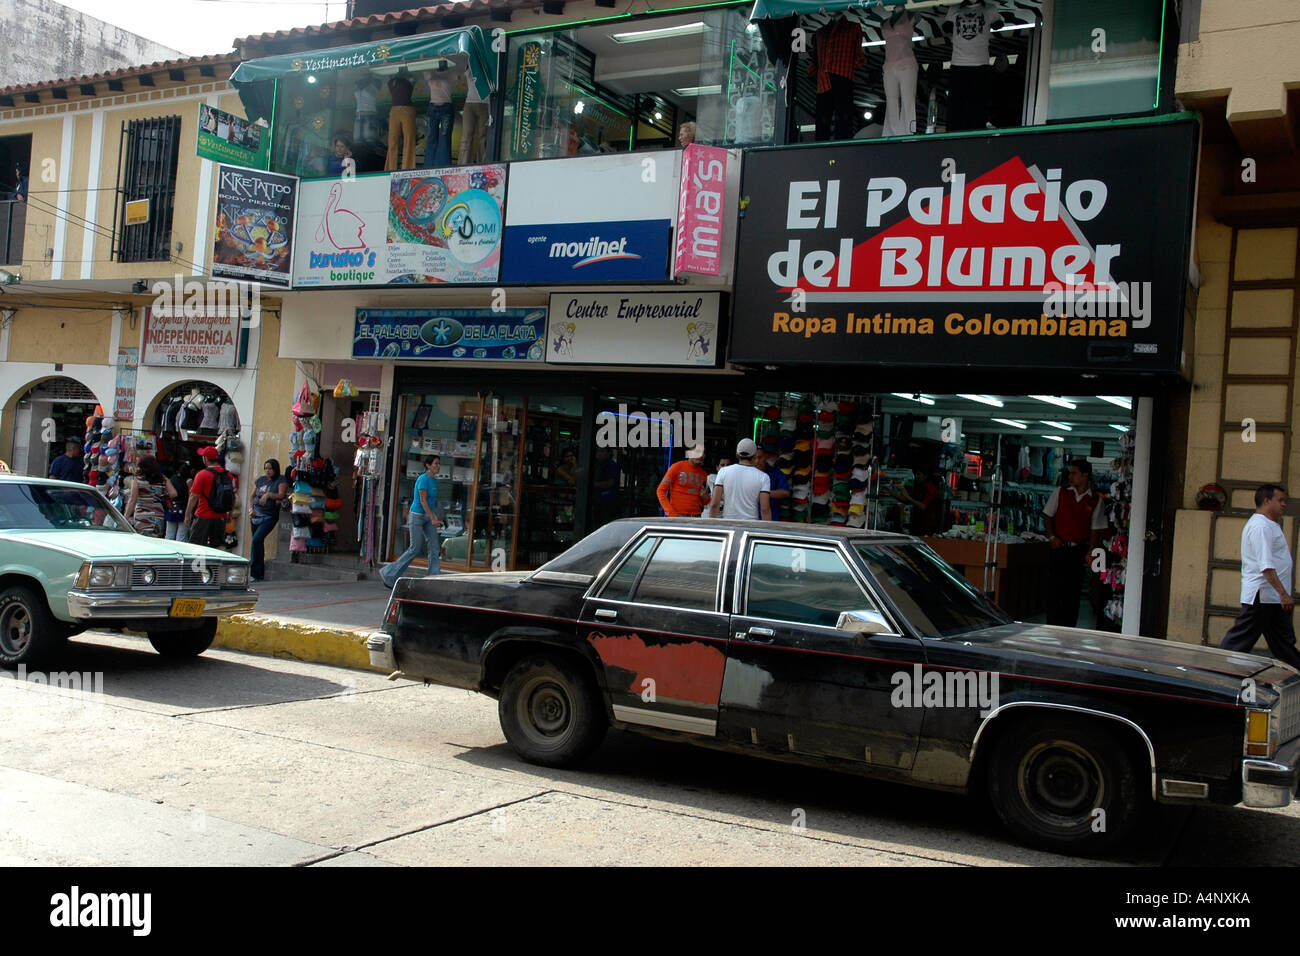 Shops in busy downtown Mérida, Venezuela, and one of the popular